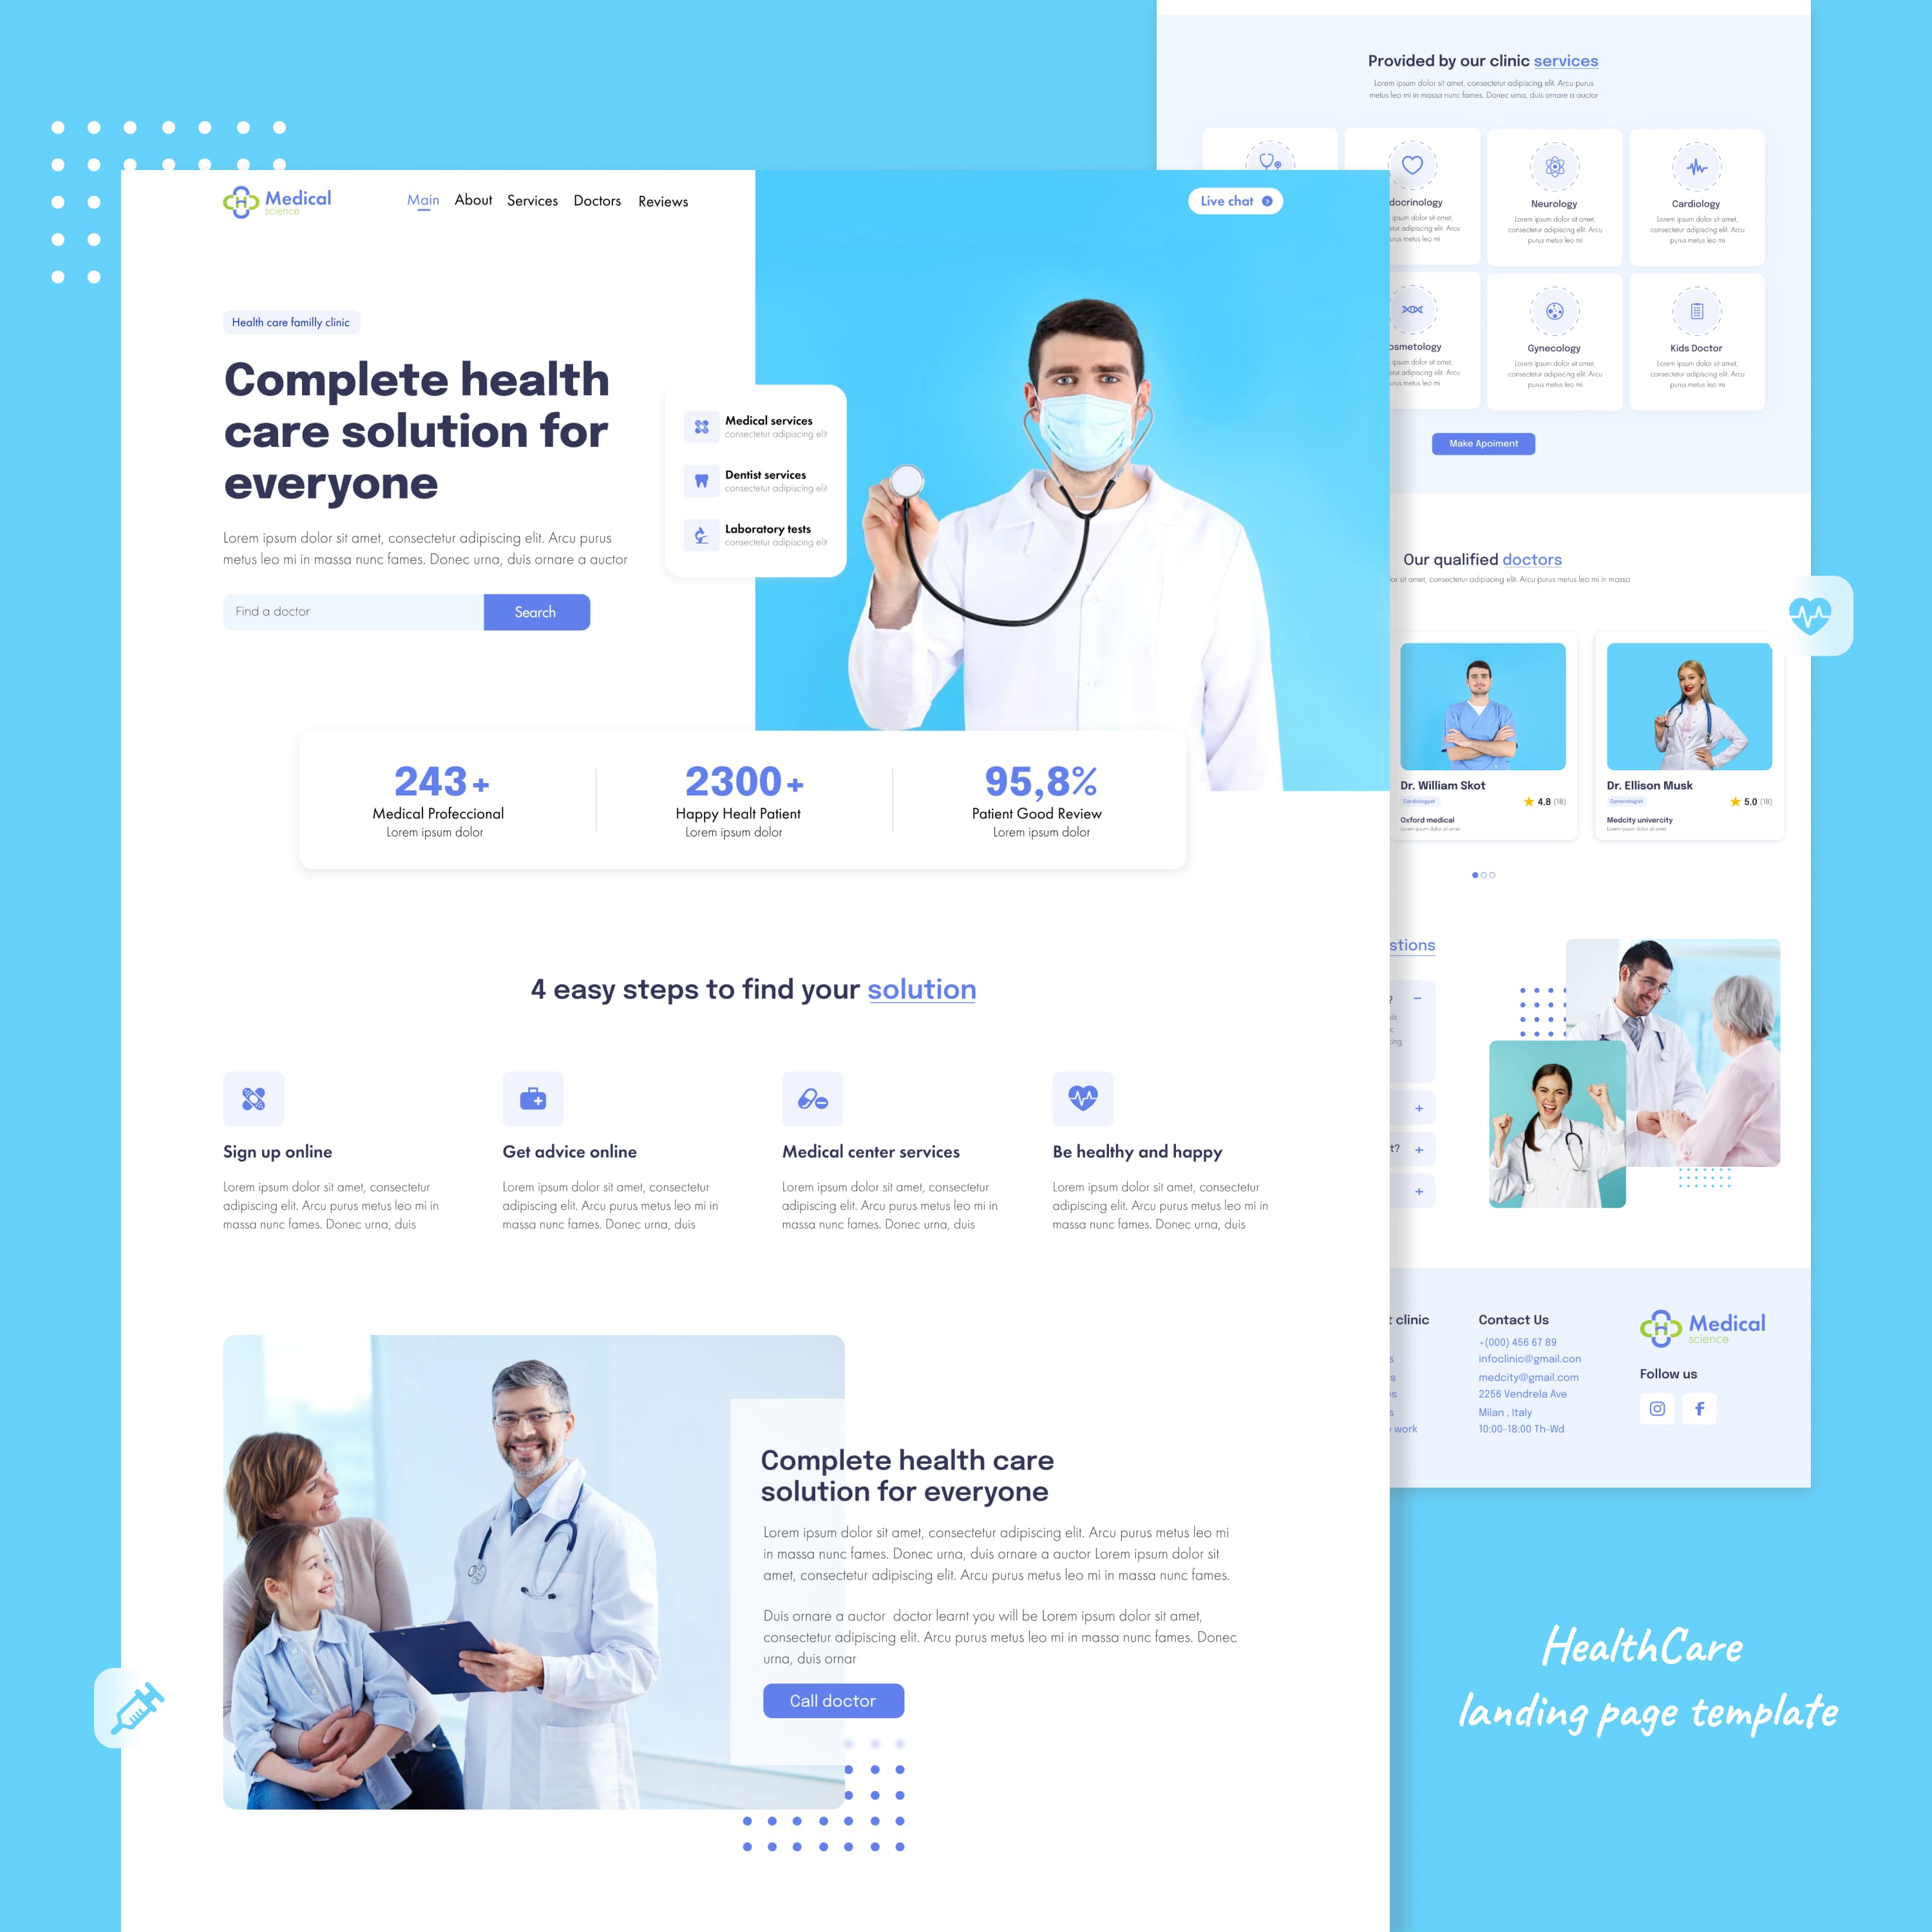 healthcare landing page template cover.